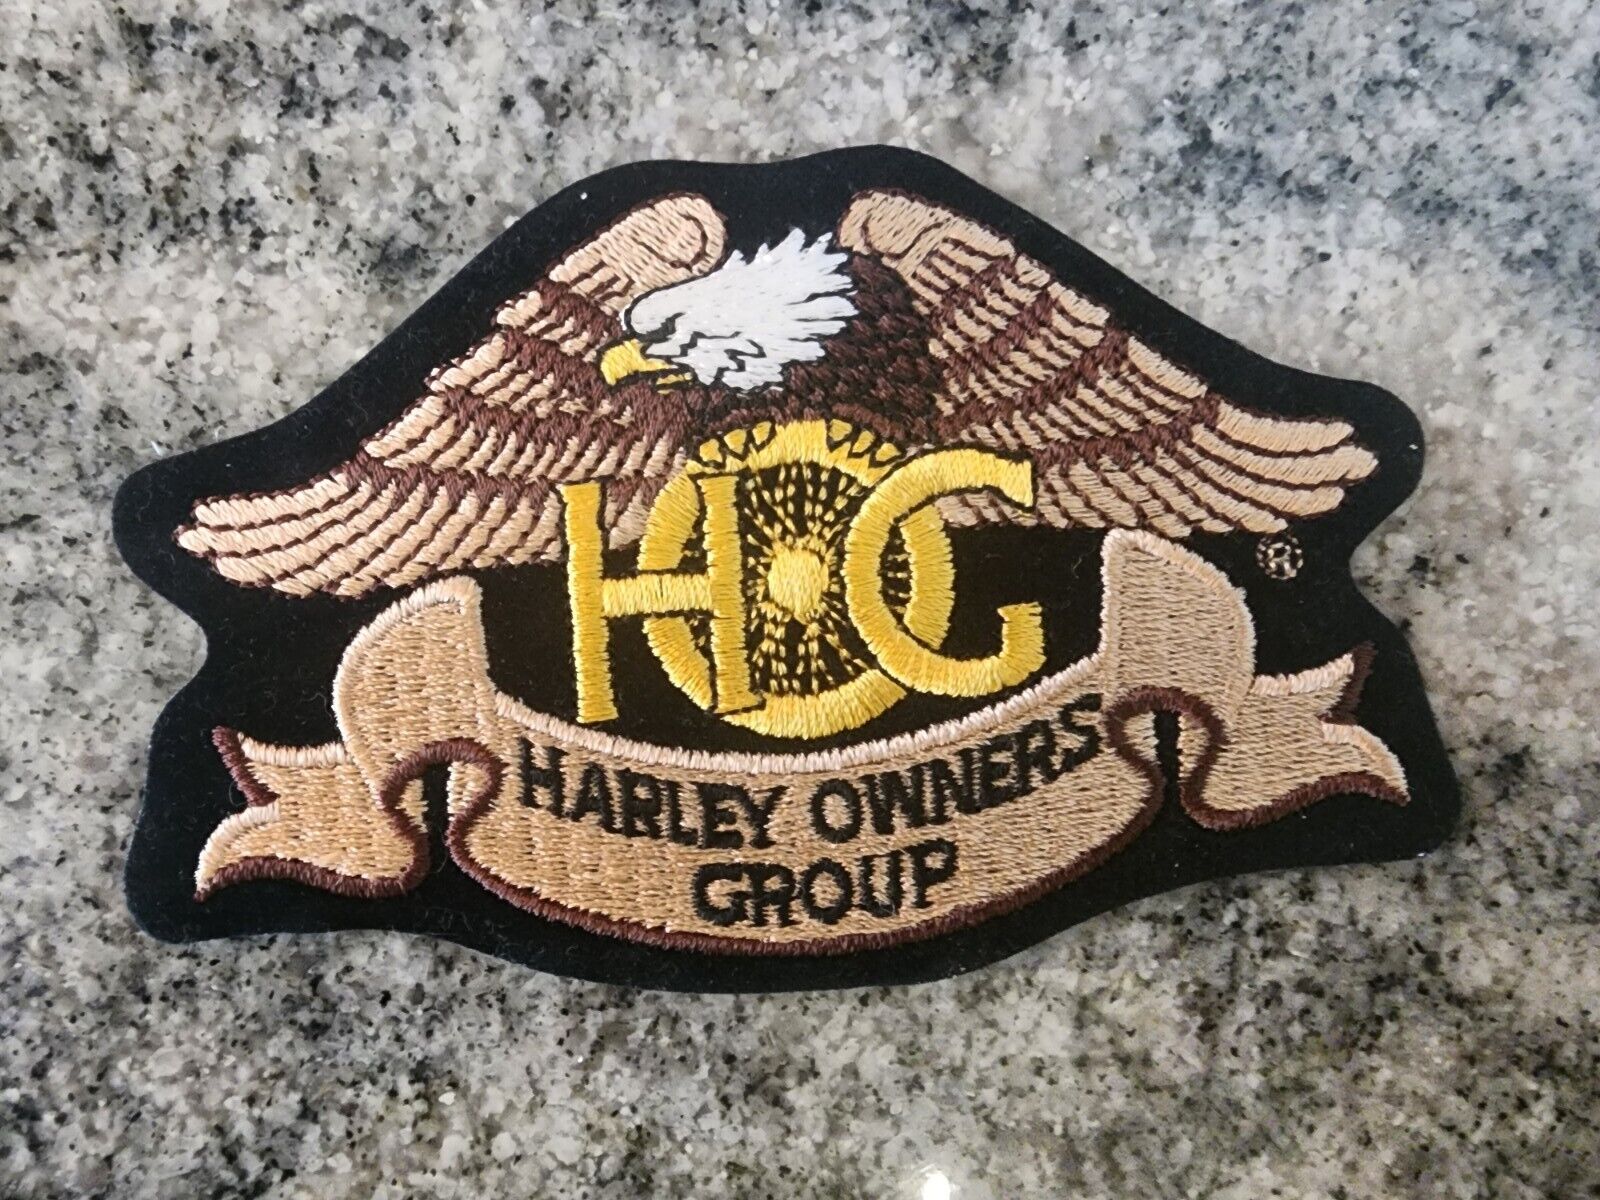 NEW Harley Davidson Owners Group HOG Eagle Iron-on Sew-on Jacket Patch 4.75\